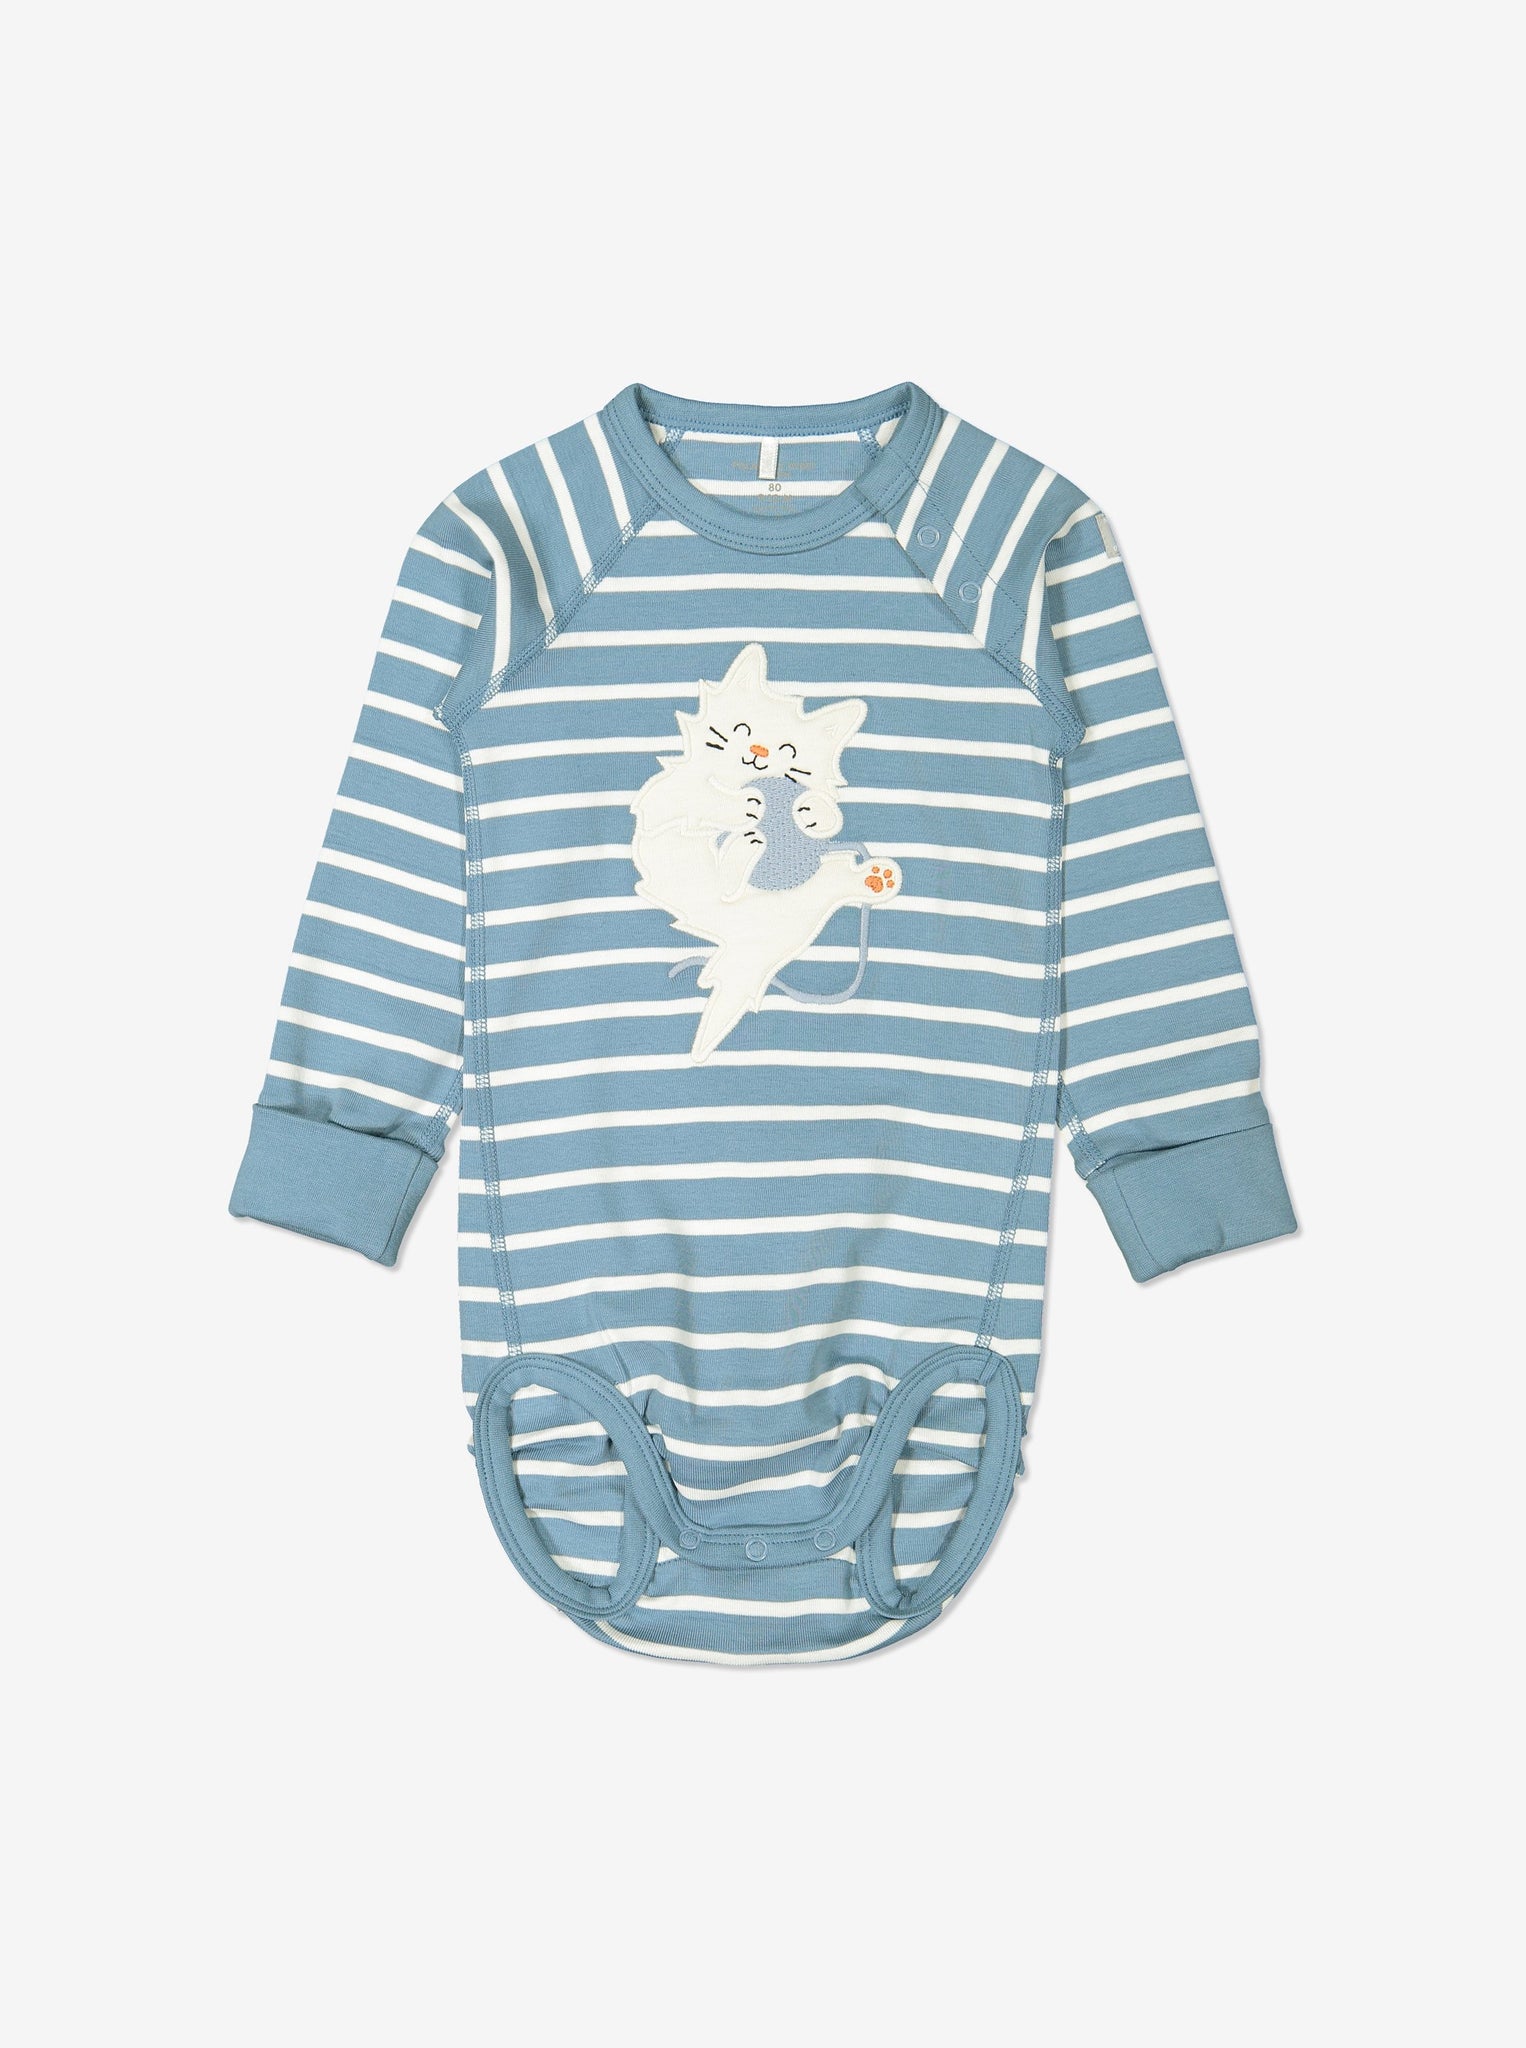 Blue and white striped babygrow for babies with poppers on one shoulder for easy dressing, made from GOTS organic cotton fabric with fun kitten playing with ball applique